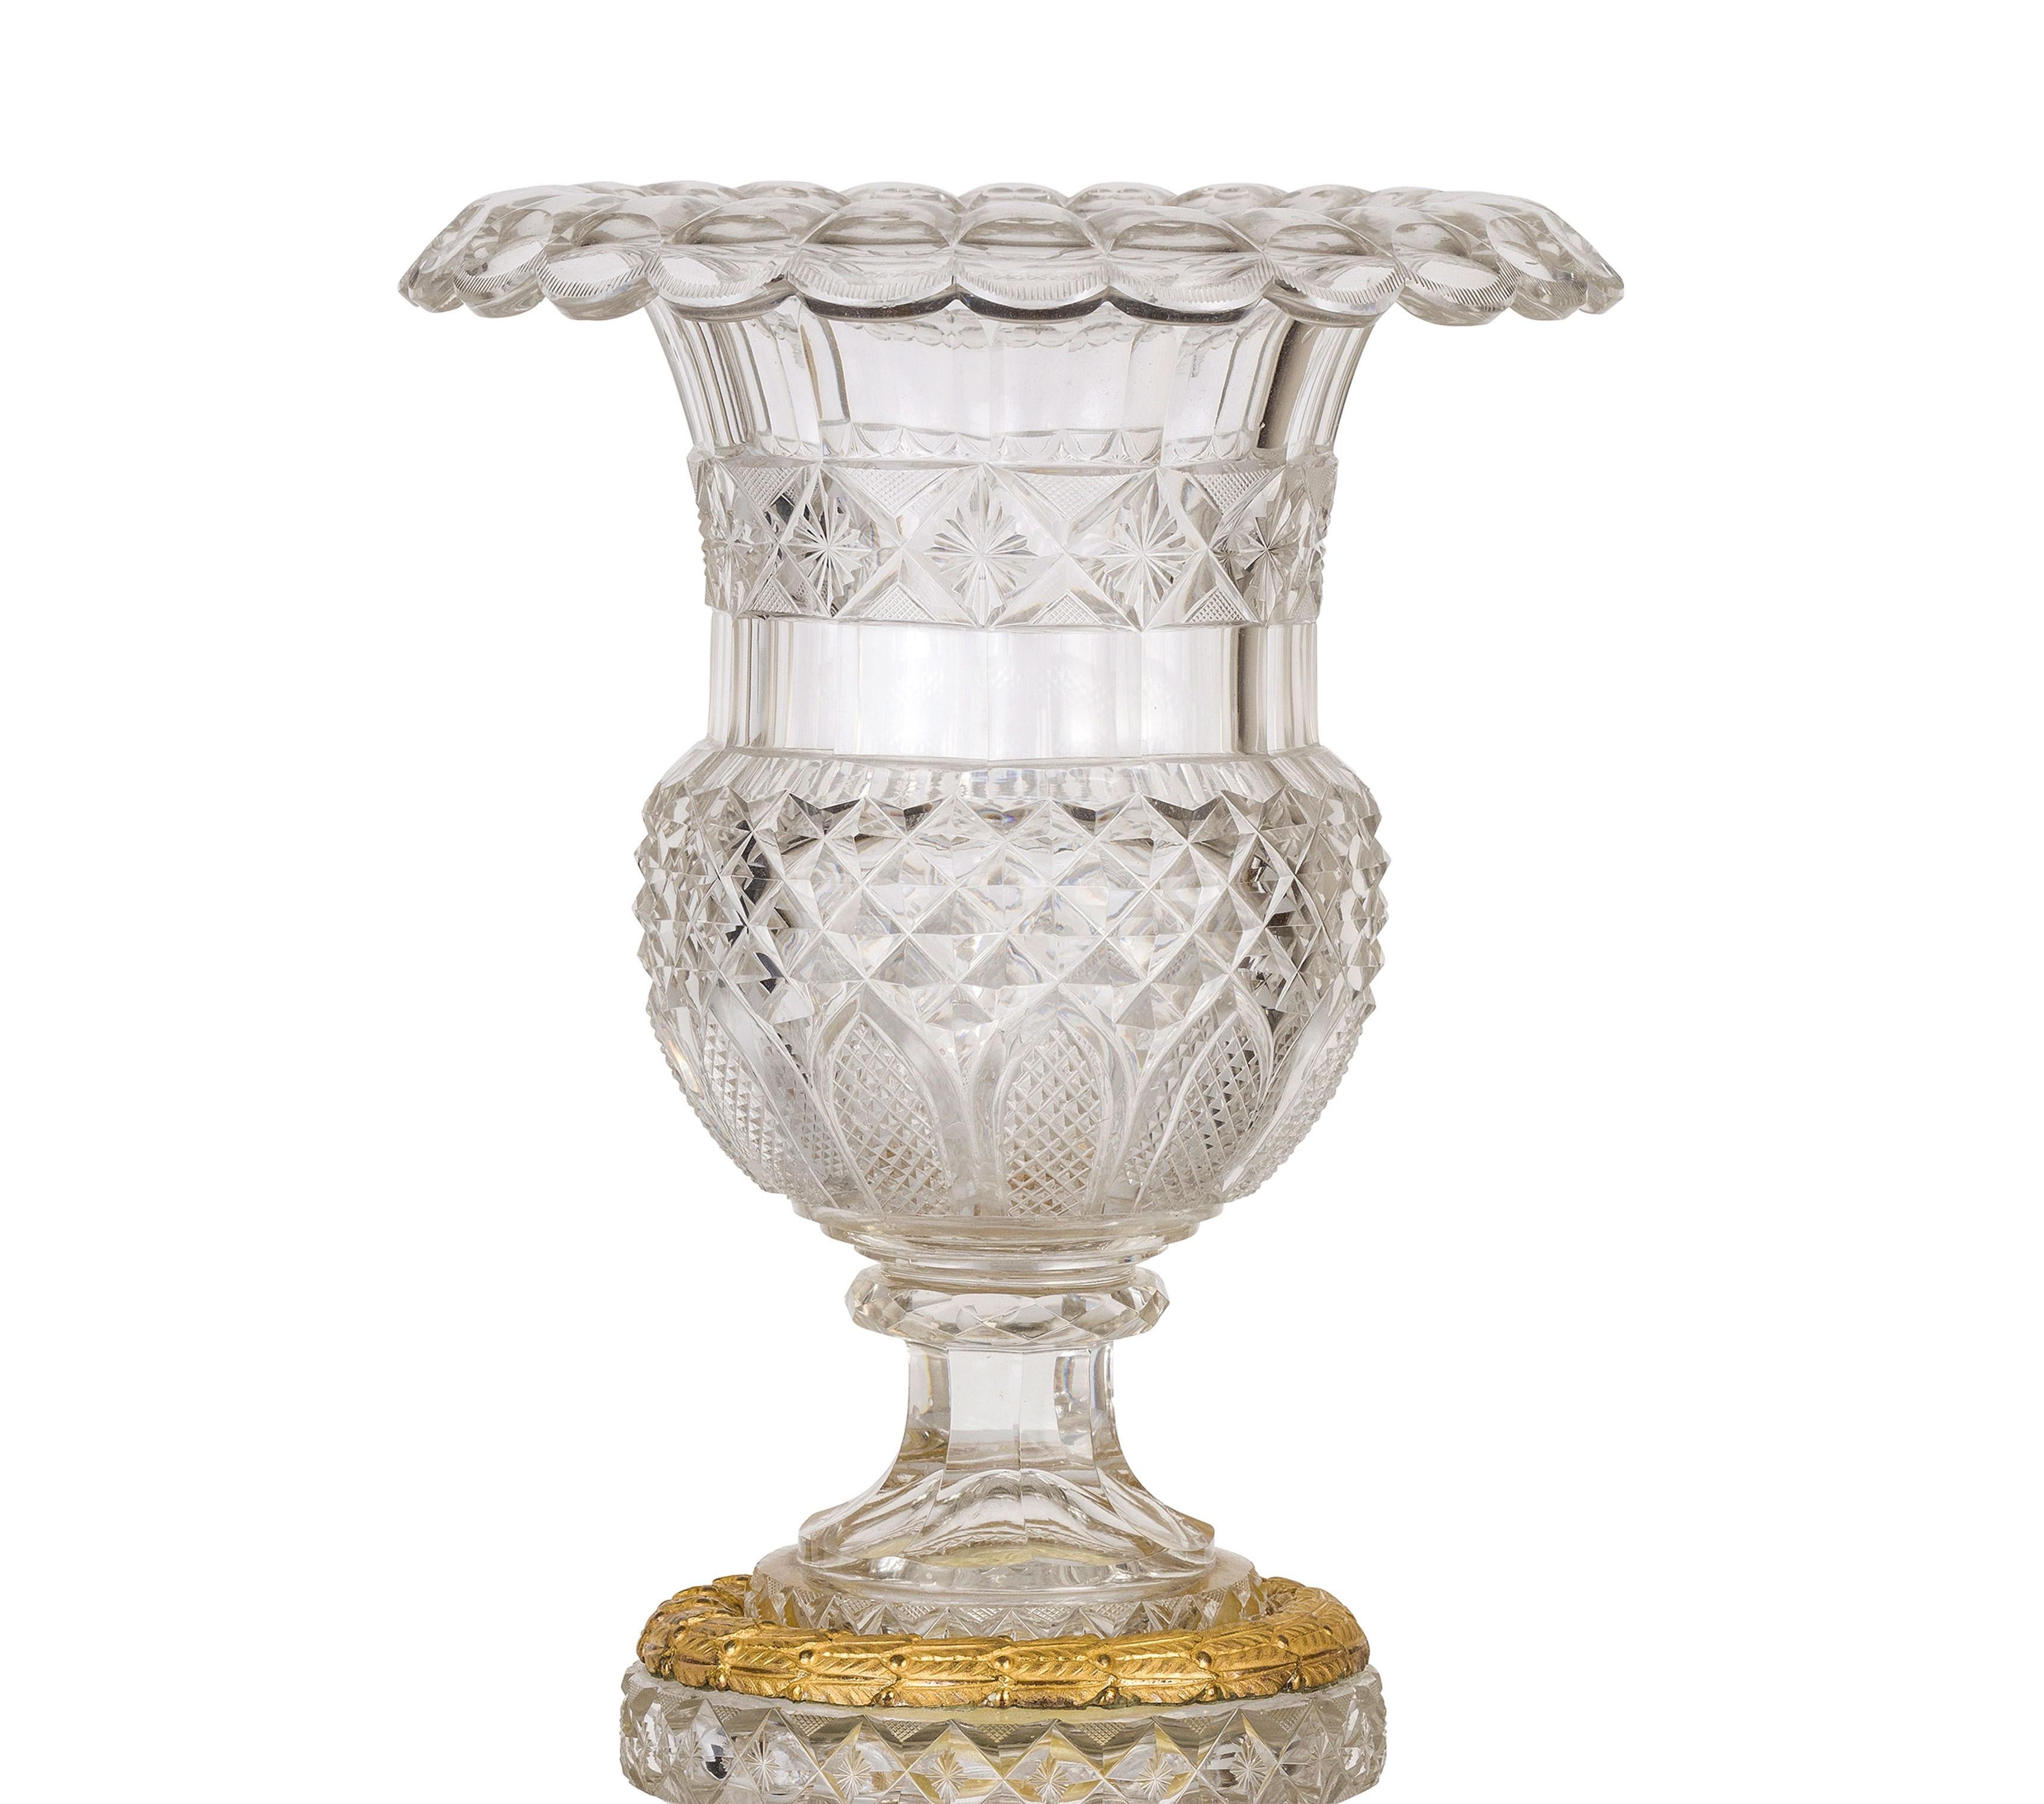 19th century, French Empire ground crystal and gilt bronze vase centrepiece

This Empire centerpiece, made in France at the beginning of the 19th century, consists of a large vase in ground glass resting on a cylindrical elevation with concave